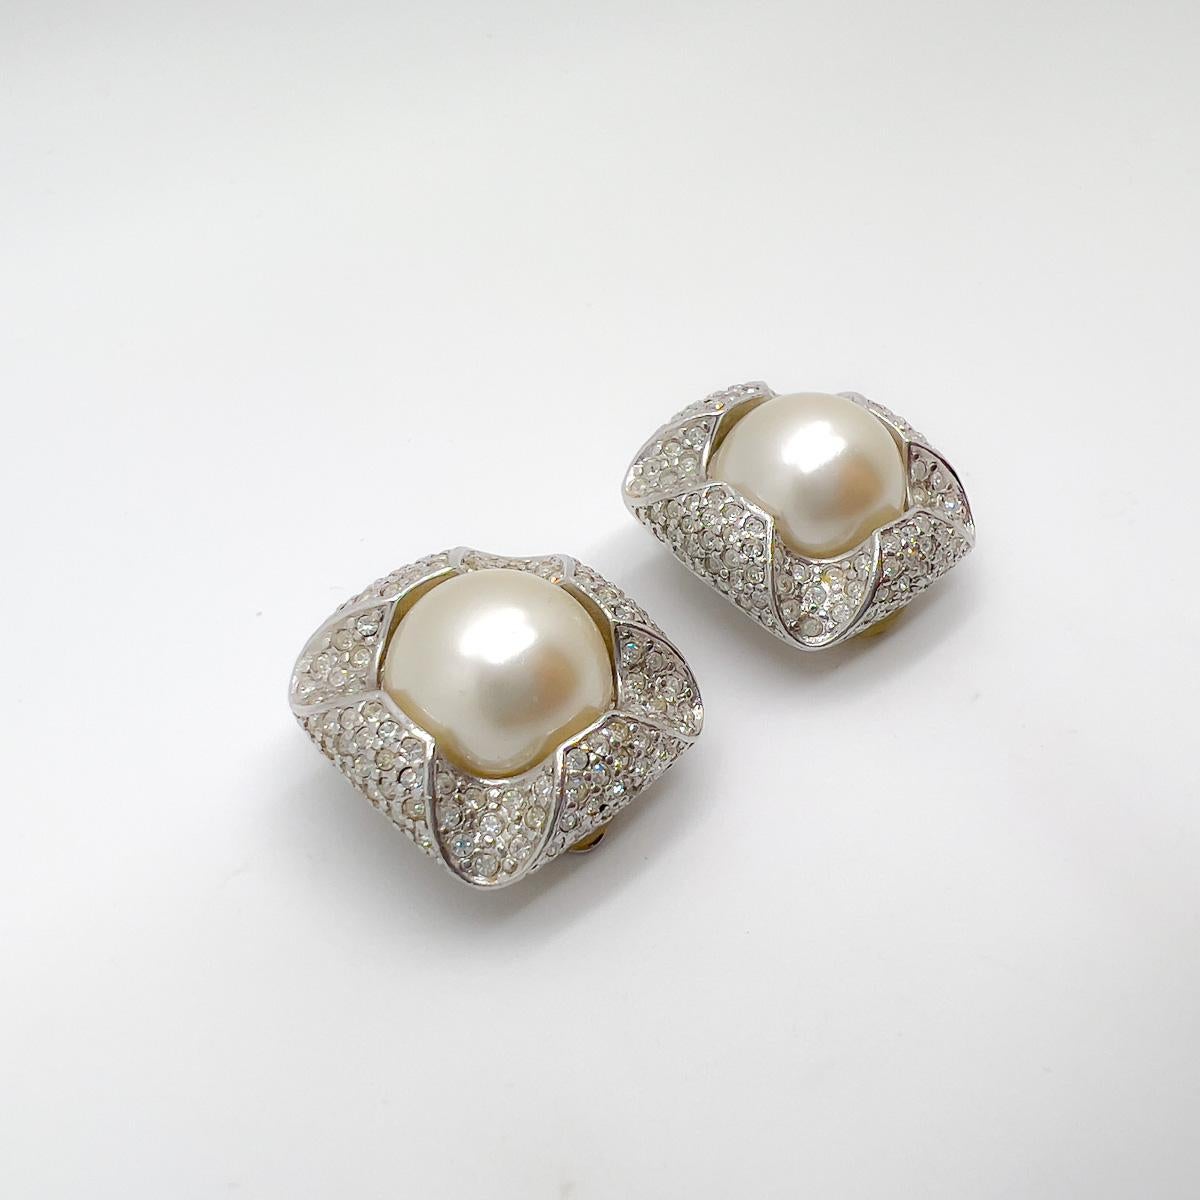 A timeless and ultra chic pair of Vintage Grossé Crystal & Pearl Earrings. A vision of diamonds and pearls proving the ultimate accessory.
From modernist to centuries old styles, premiere German costume jewellers Henkel & Grosse take their